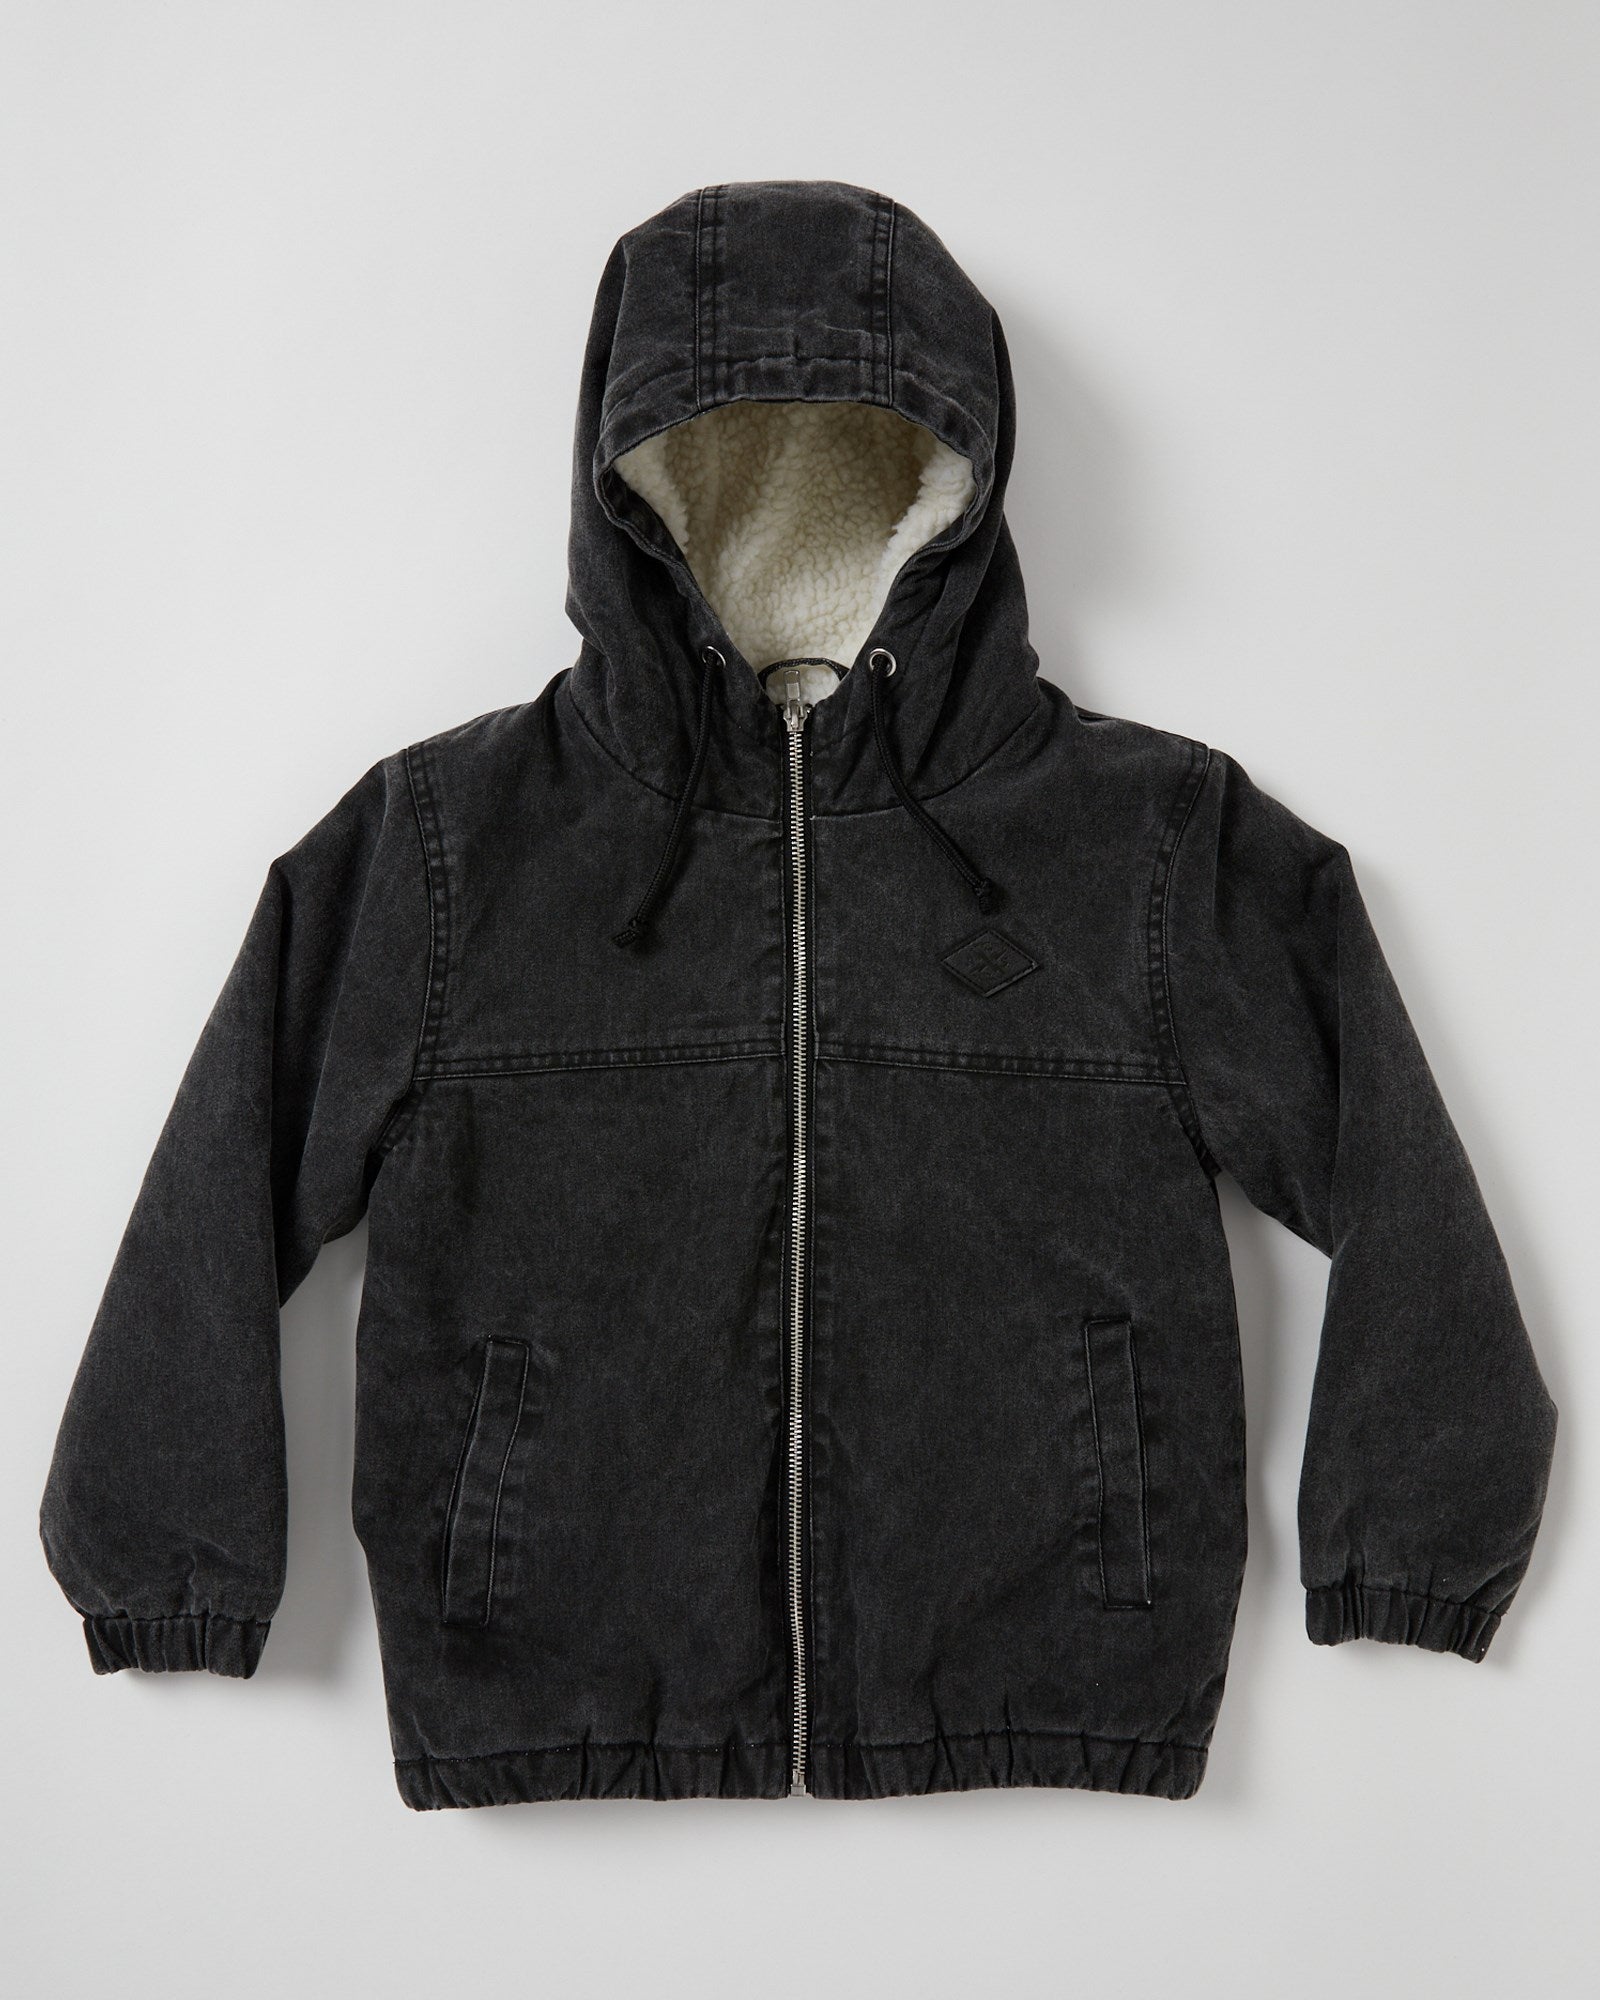 Expertly crafted Kids Summit Canvas Jacket by Alphabet Soup. Vintage dark grey wash treatment, inner Sherpa fleece lining, fixed hood design, elasticated hemline and cuffs. Stay comfortable with front hand pockets.